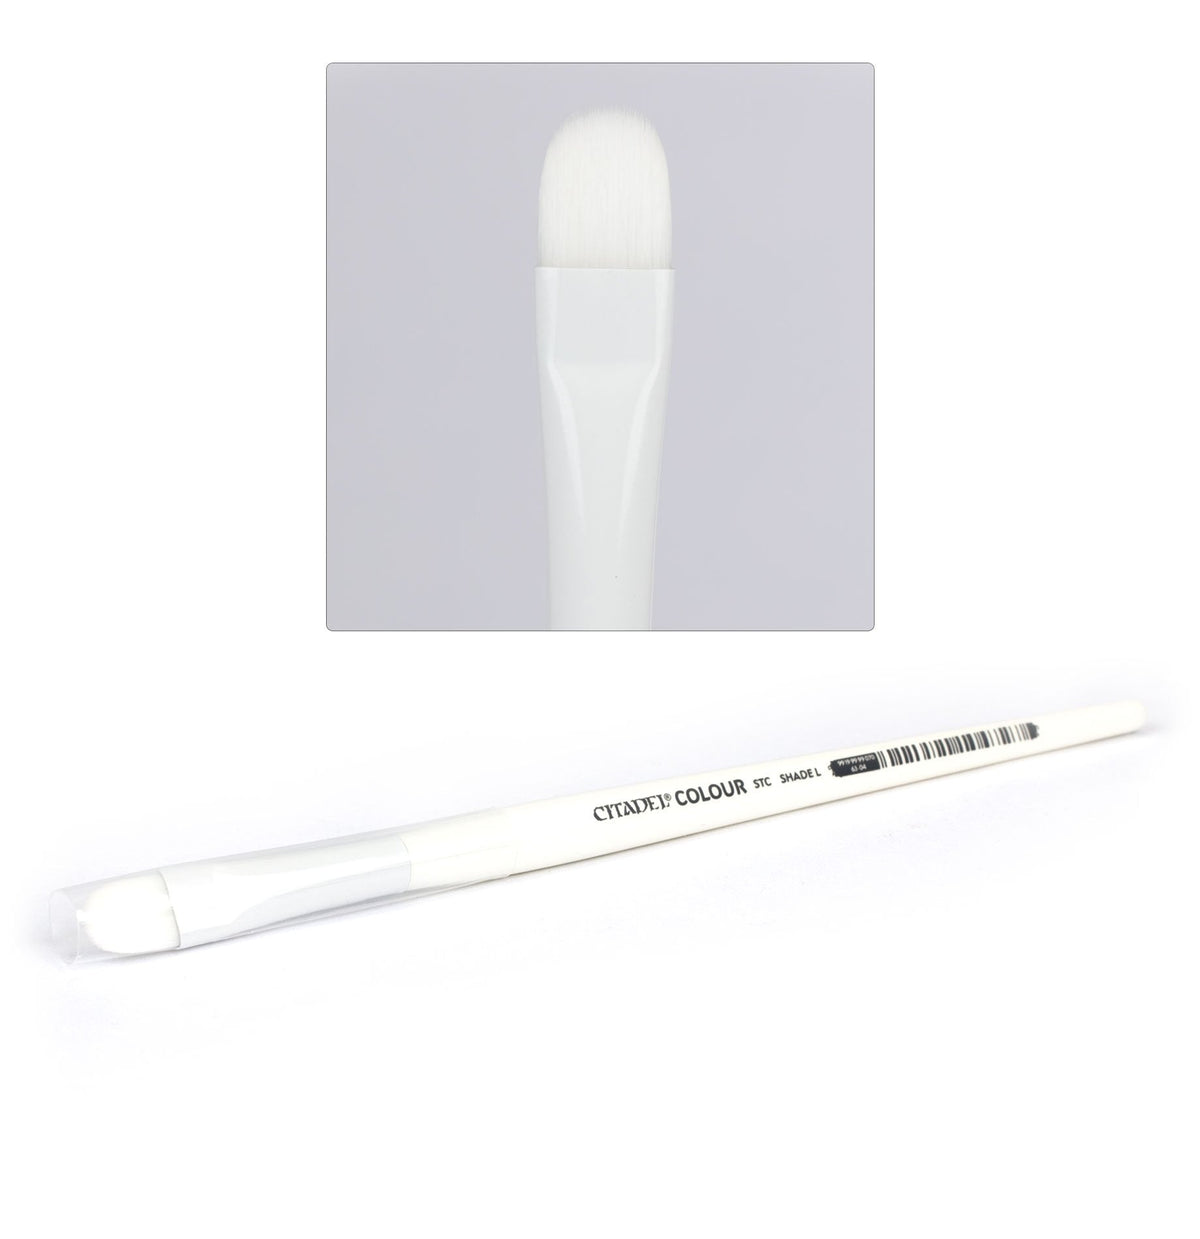 Large Synthetic Shade Brush (Citadel Colour)